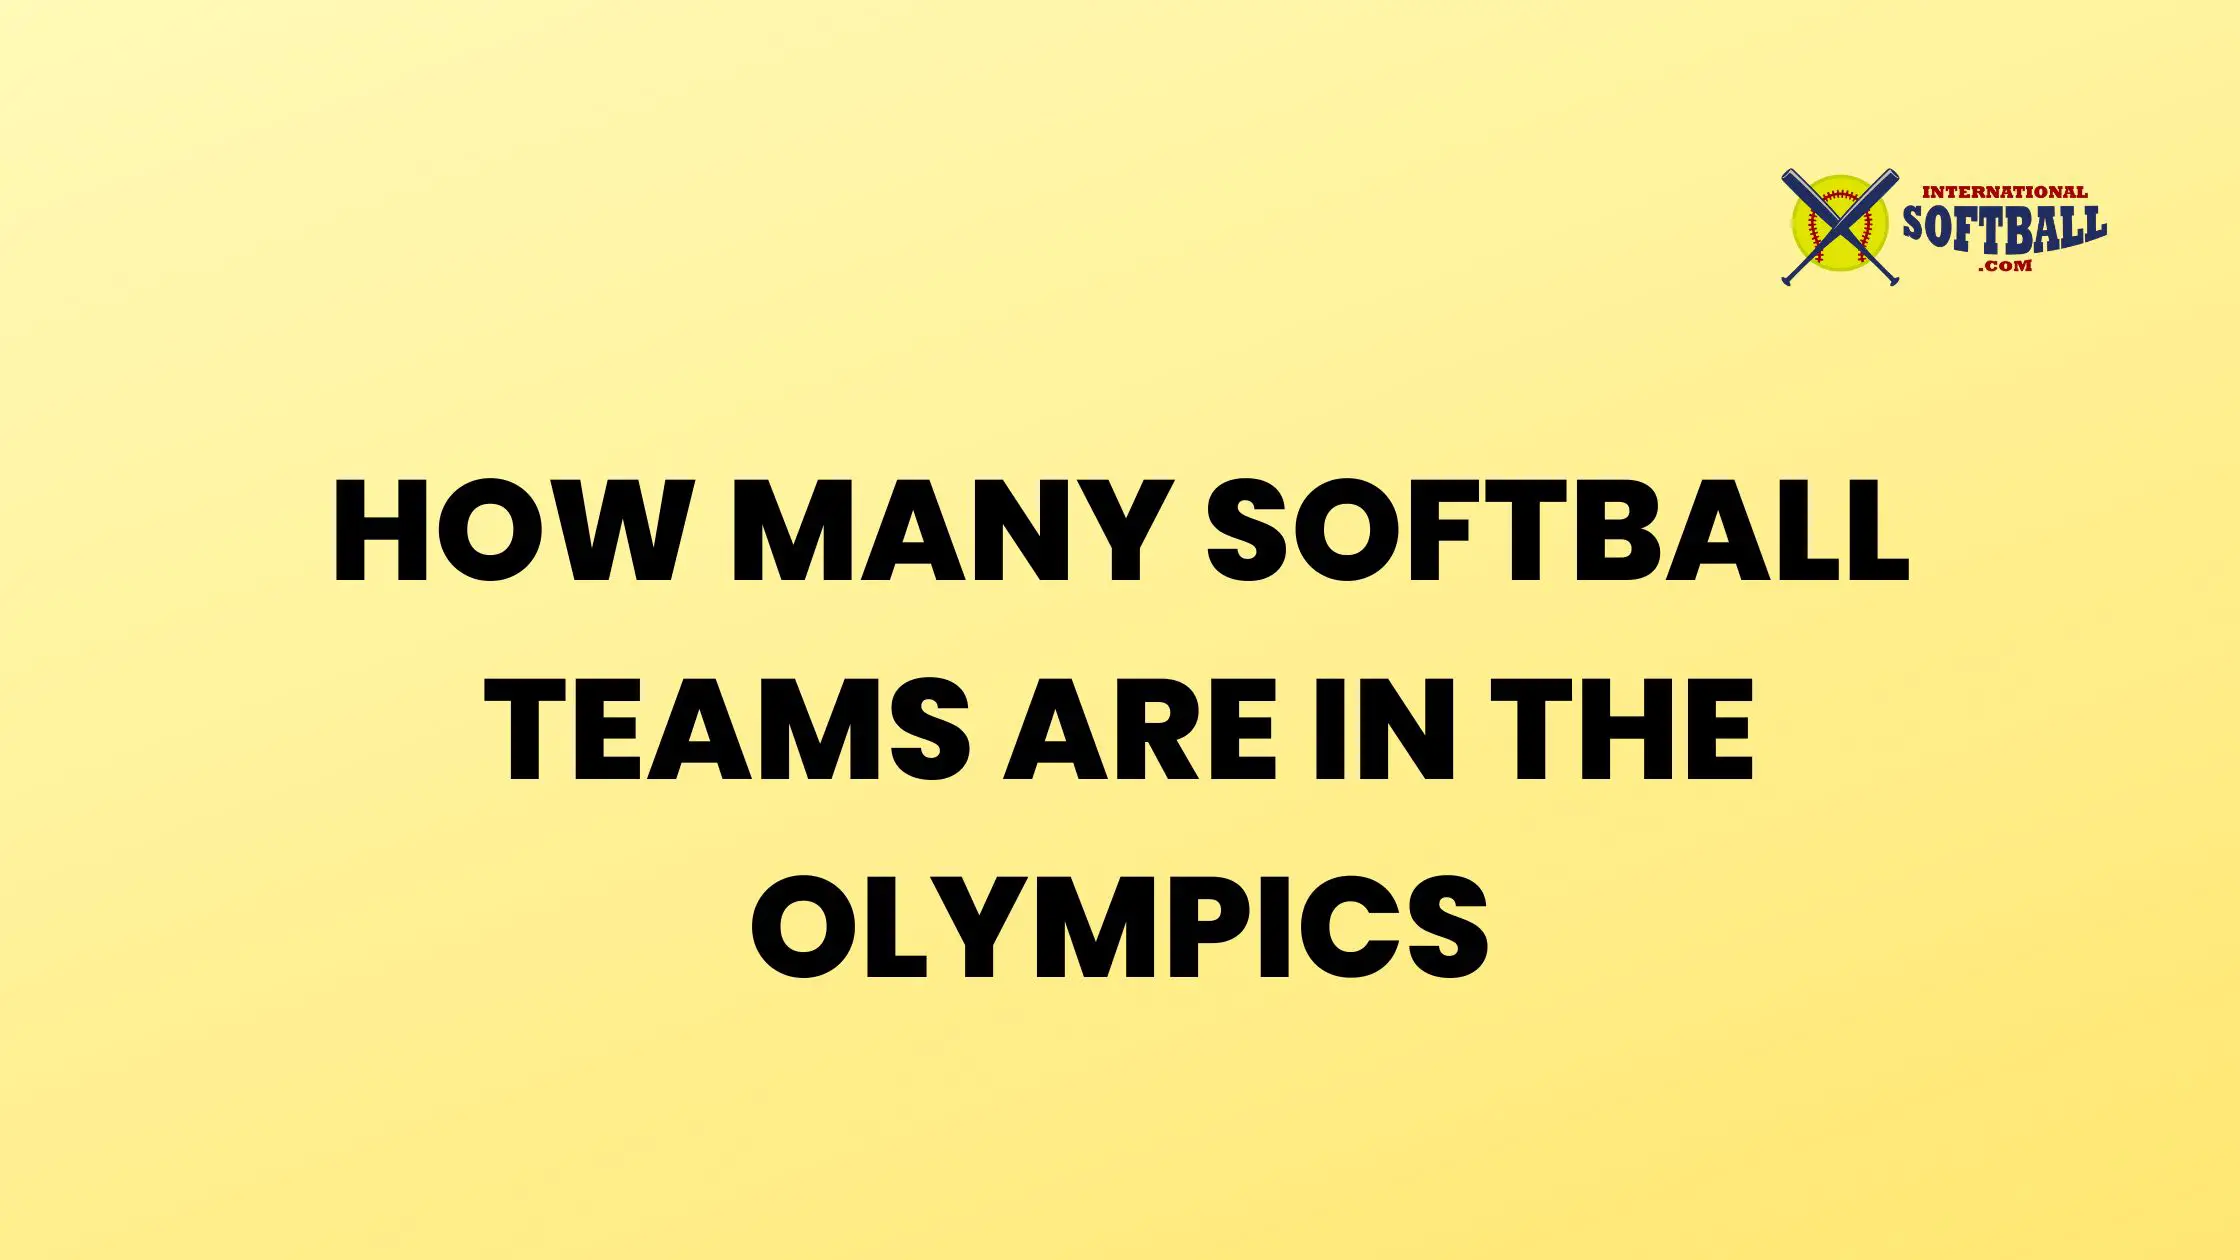 HOW MANY SOFTBALL TEAMS ARE IN THE OLYMPICS